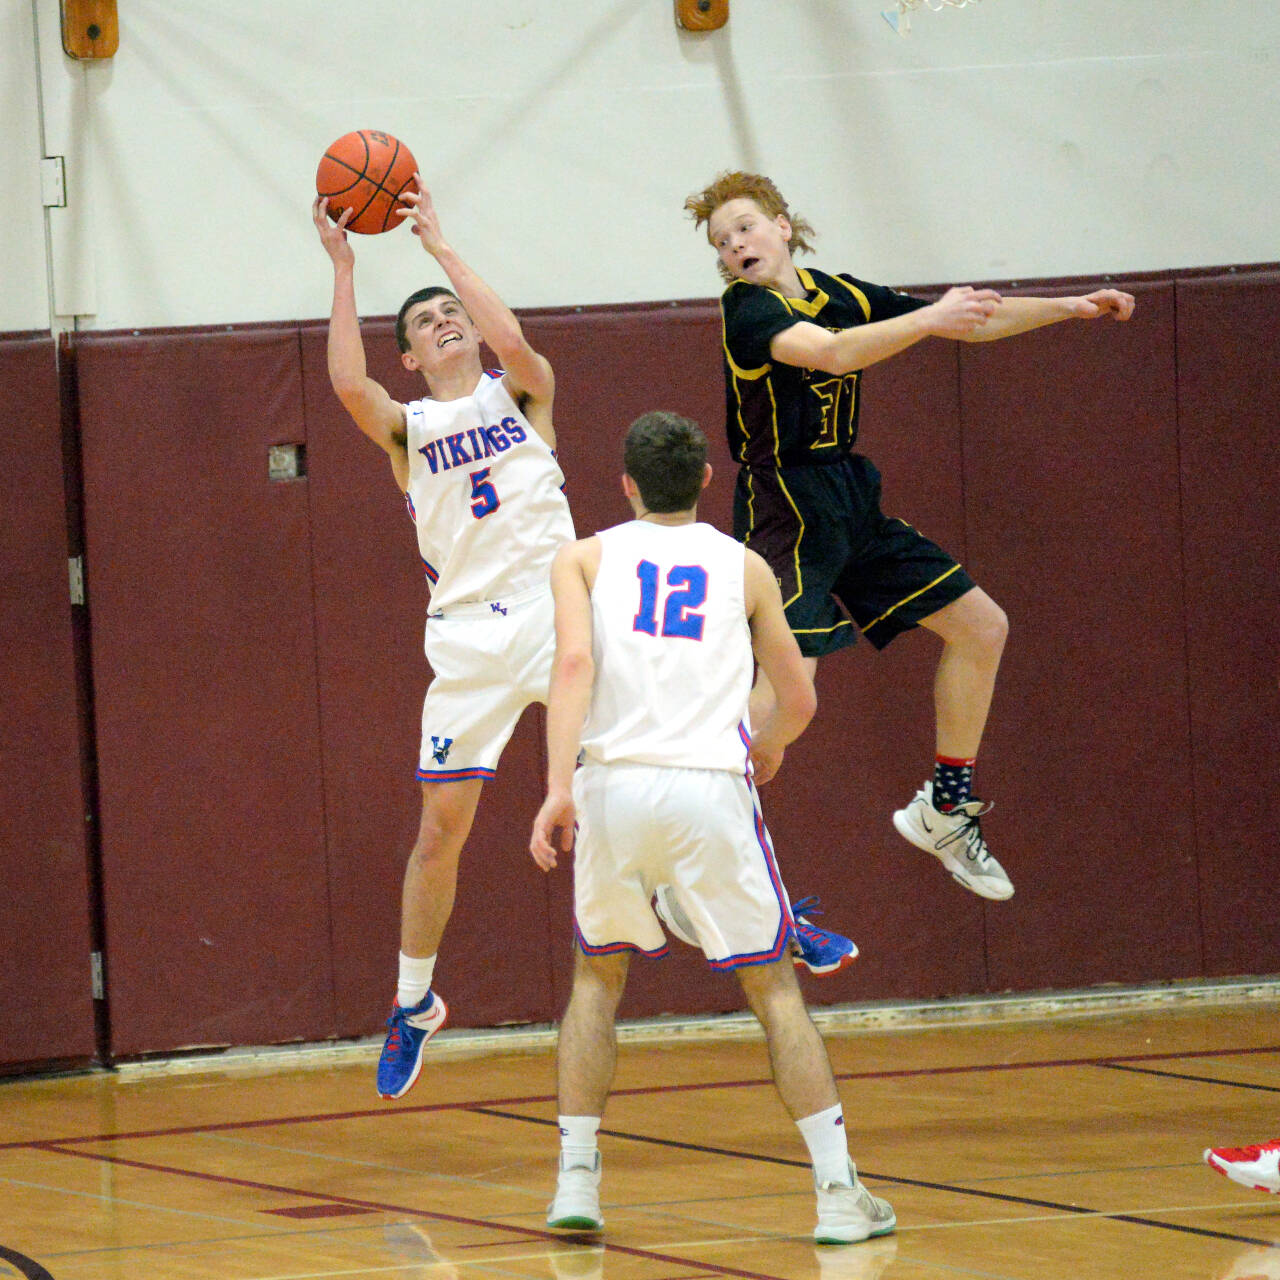 RYAN SPARKS | THE DAILY WORLD Willapa Valley forward Wil Clements (5) leaps for a rebound against Sunnyside Christian’s Buddy Smeenk during the Vikings’ 65-59 victory in a 1B Regional round game on Saturday at WF West High School in Chehalis.